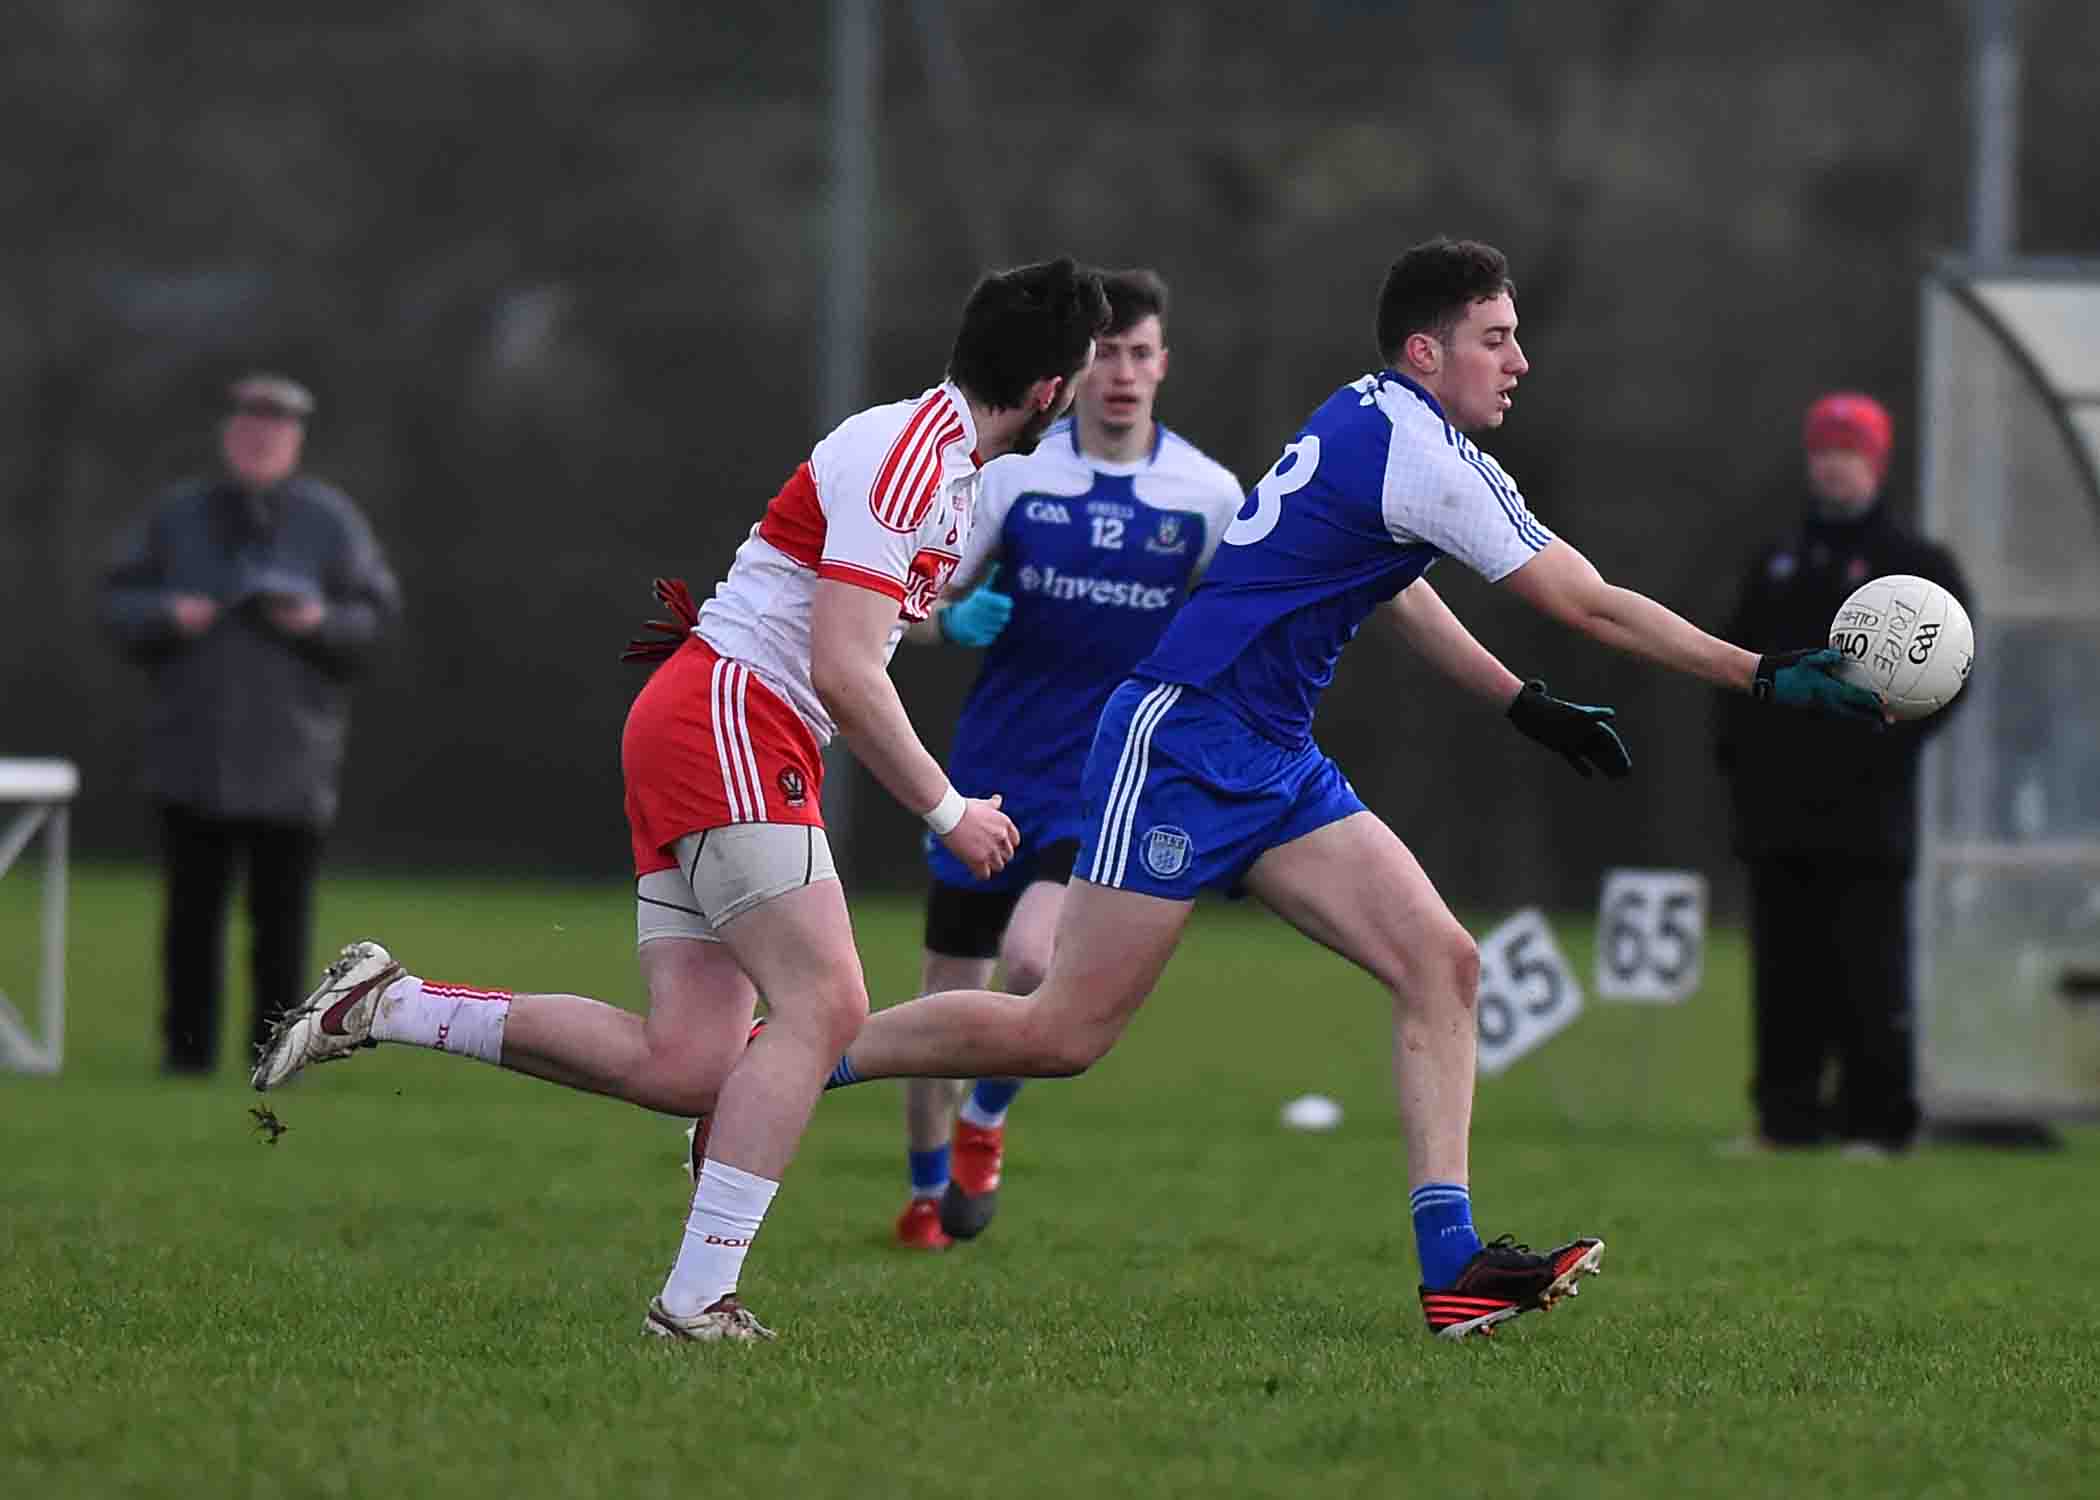 Monaghan U-21s start with a win